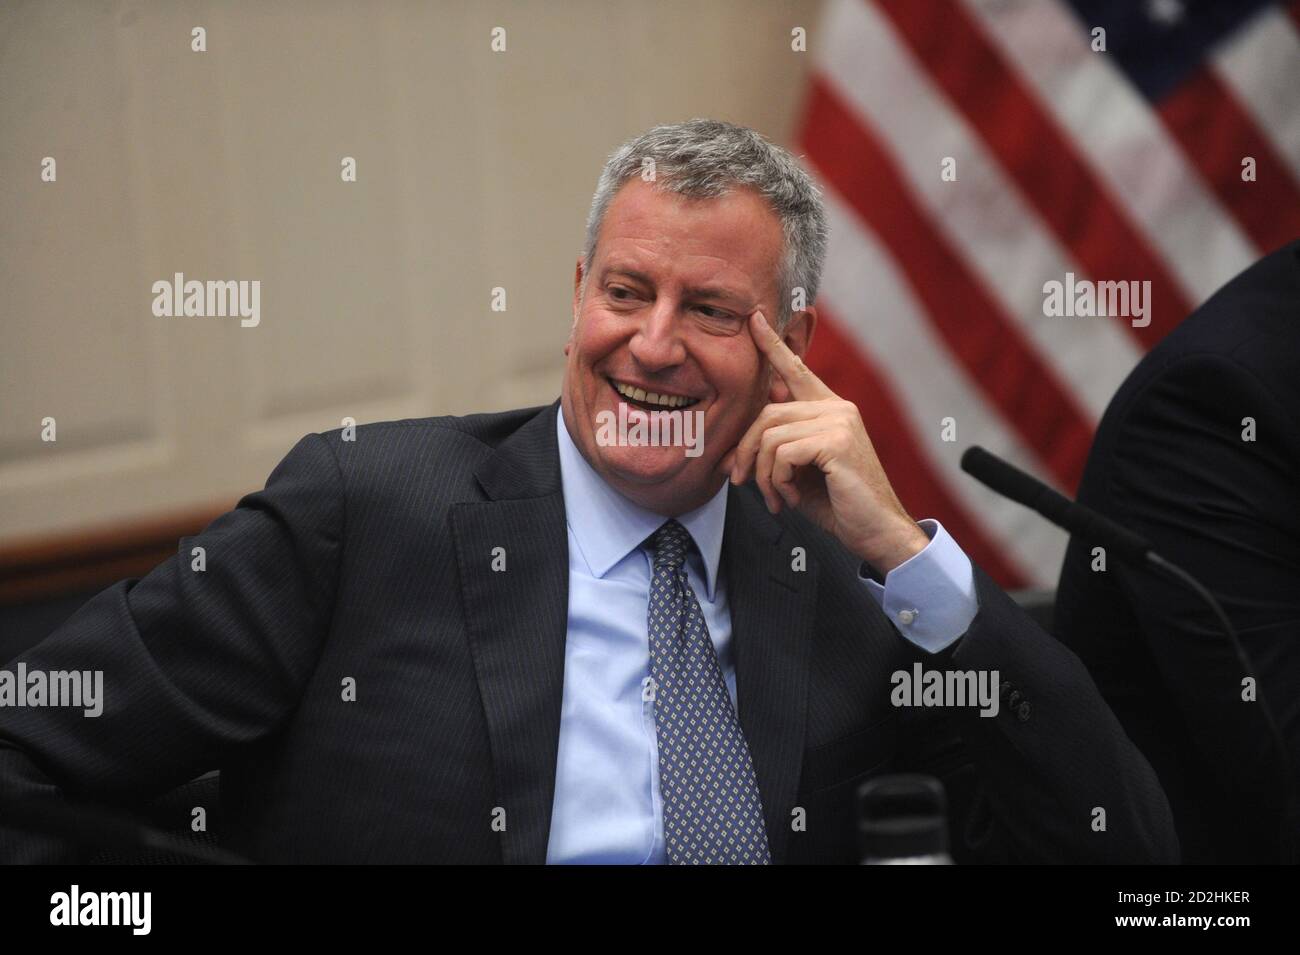 NEW YORK, NY - AUGUST 04: Incoming NYPD Commissioner James O'Neill, departing NYPD Commissioner William Bratton and New York City Mayor Bill De Blasio preside over a press conference regarding updated crime statistics at One Police Plaza on August 4, 2016 in New York City People:  Bill de Blasio Credit: Hoo-me / MediaPunch Stock Photo